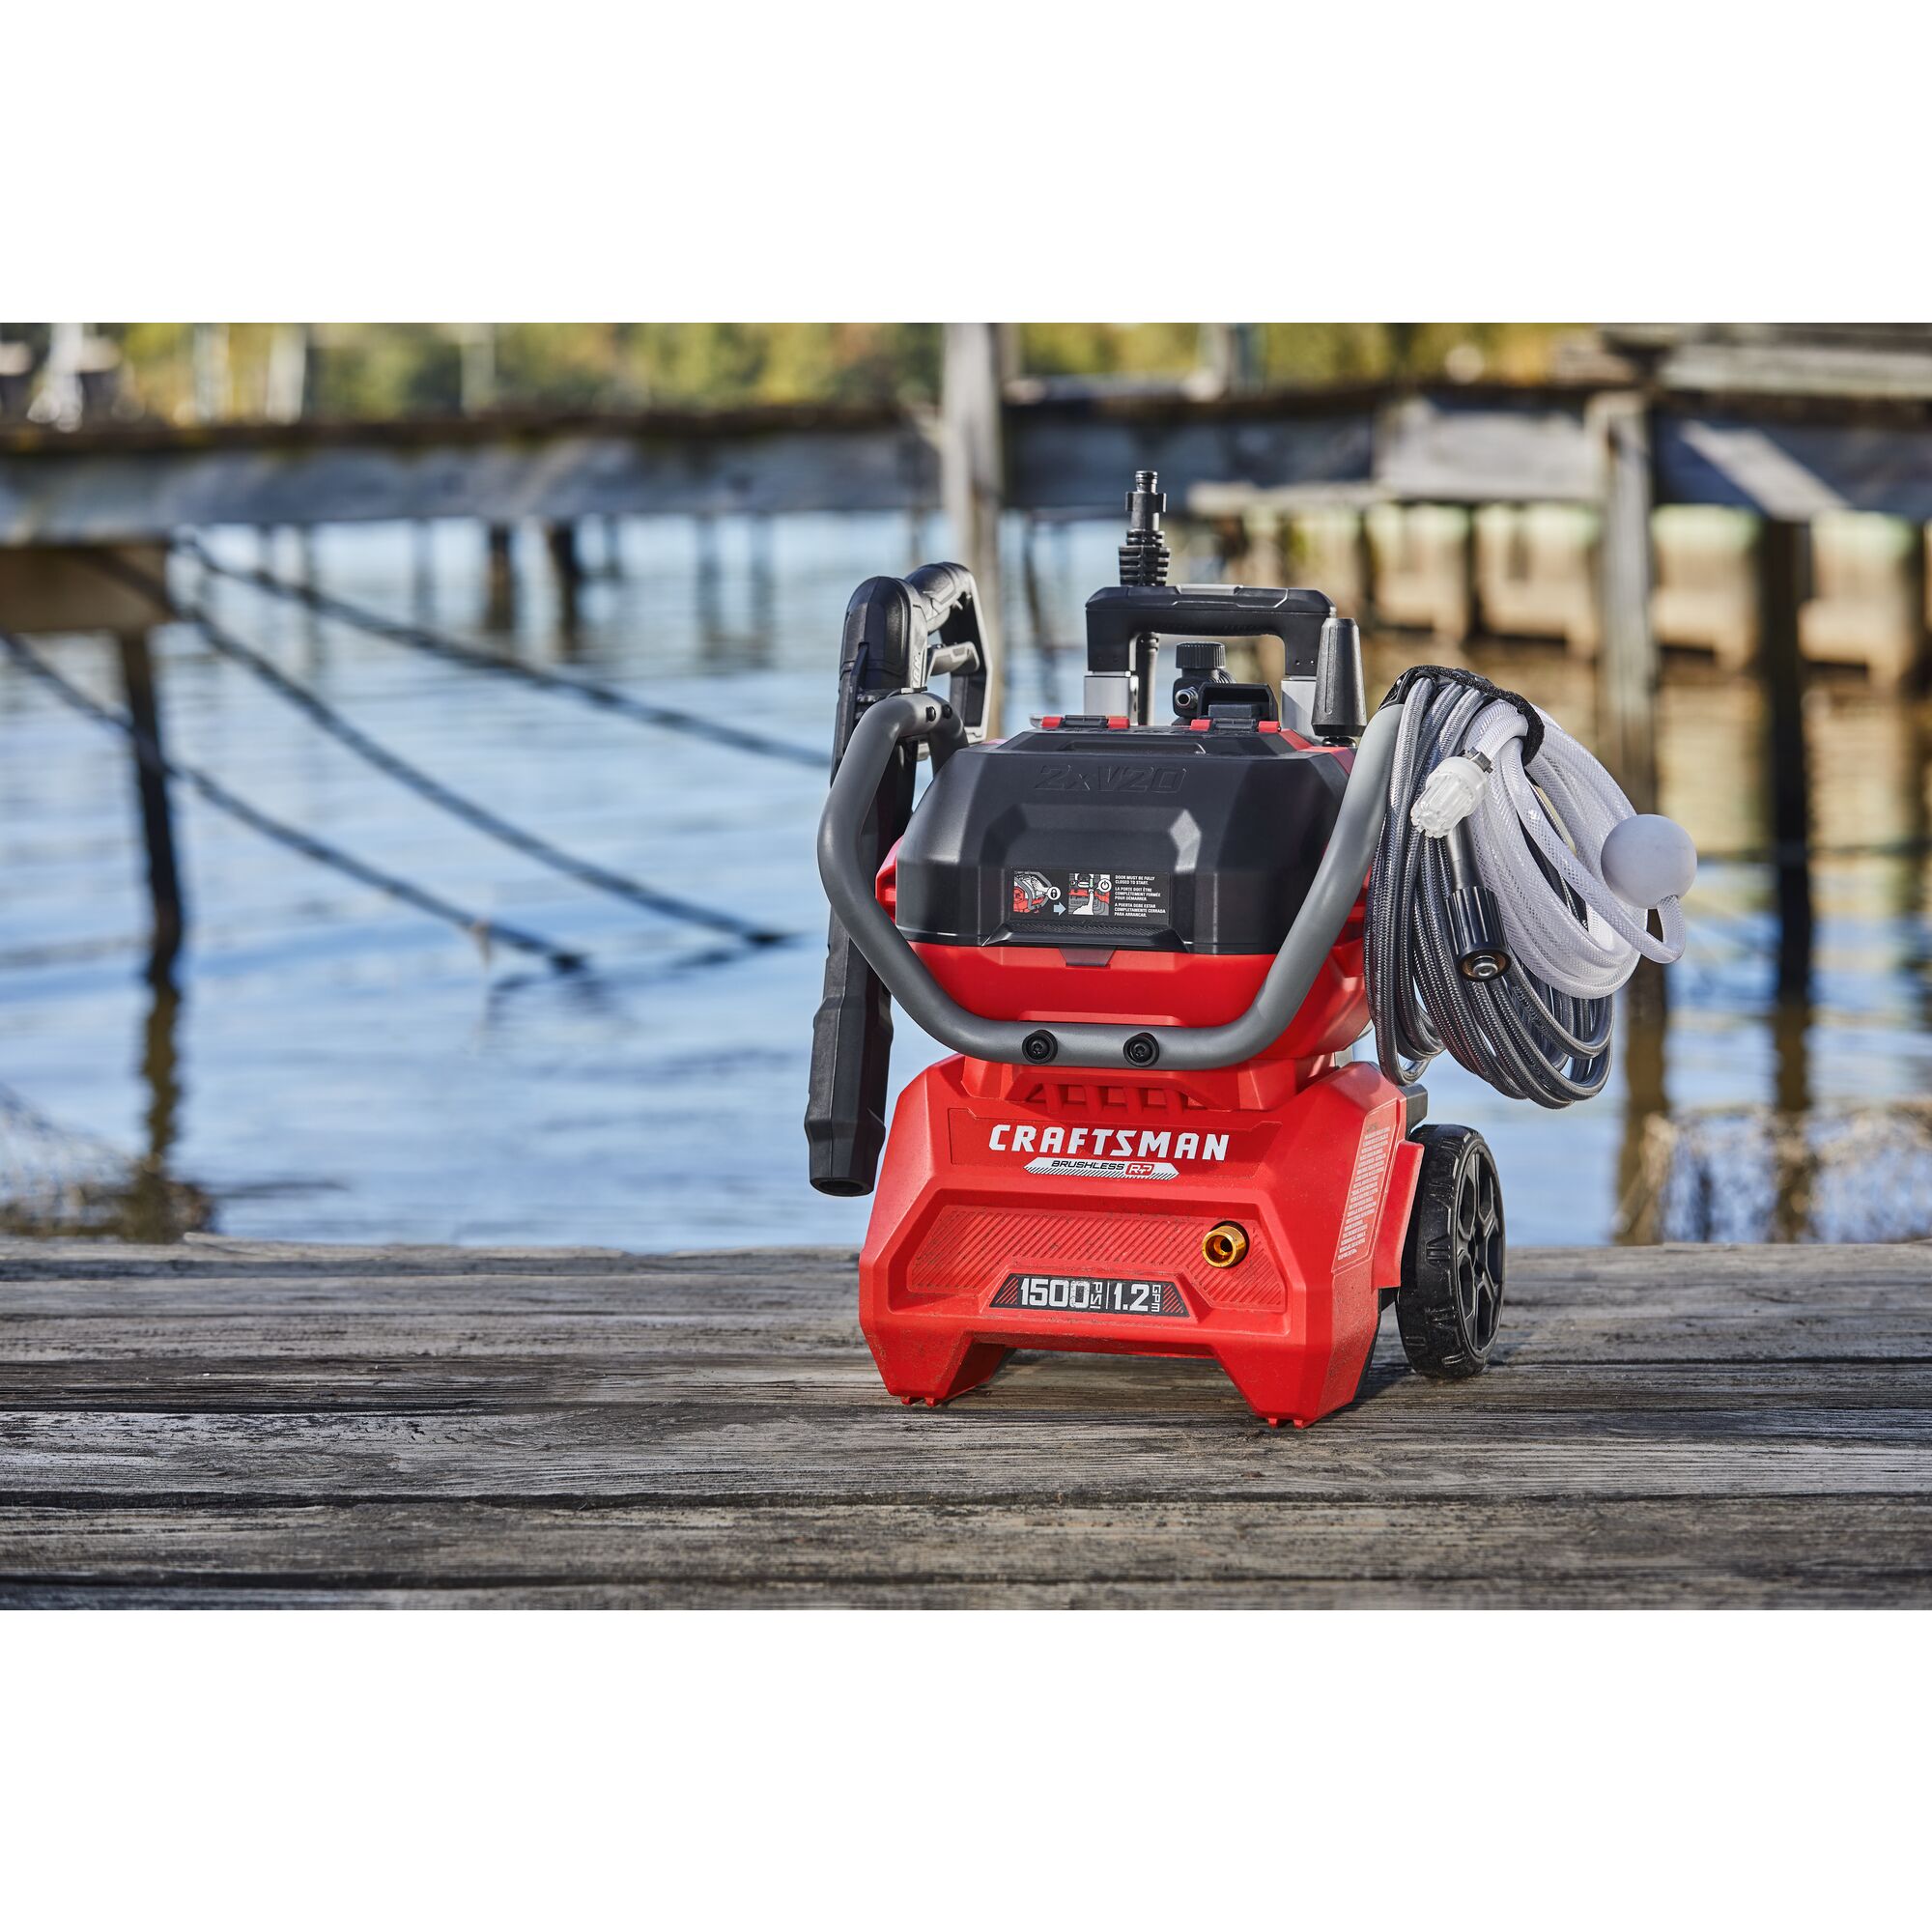 CRAFTSMAN 1500 PSI Pressure Washer sitting on pier with no person and water in background